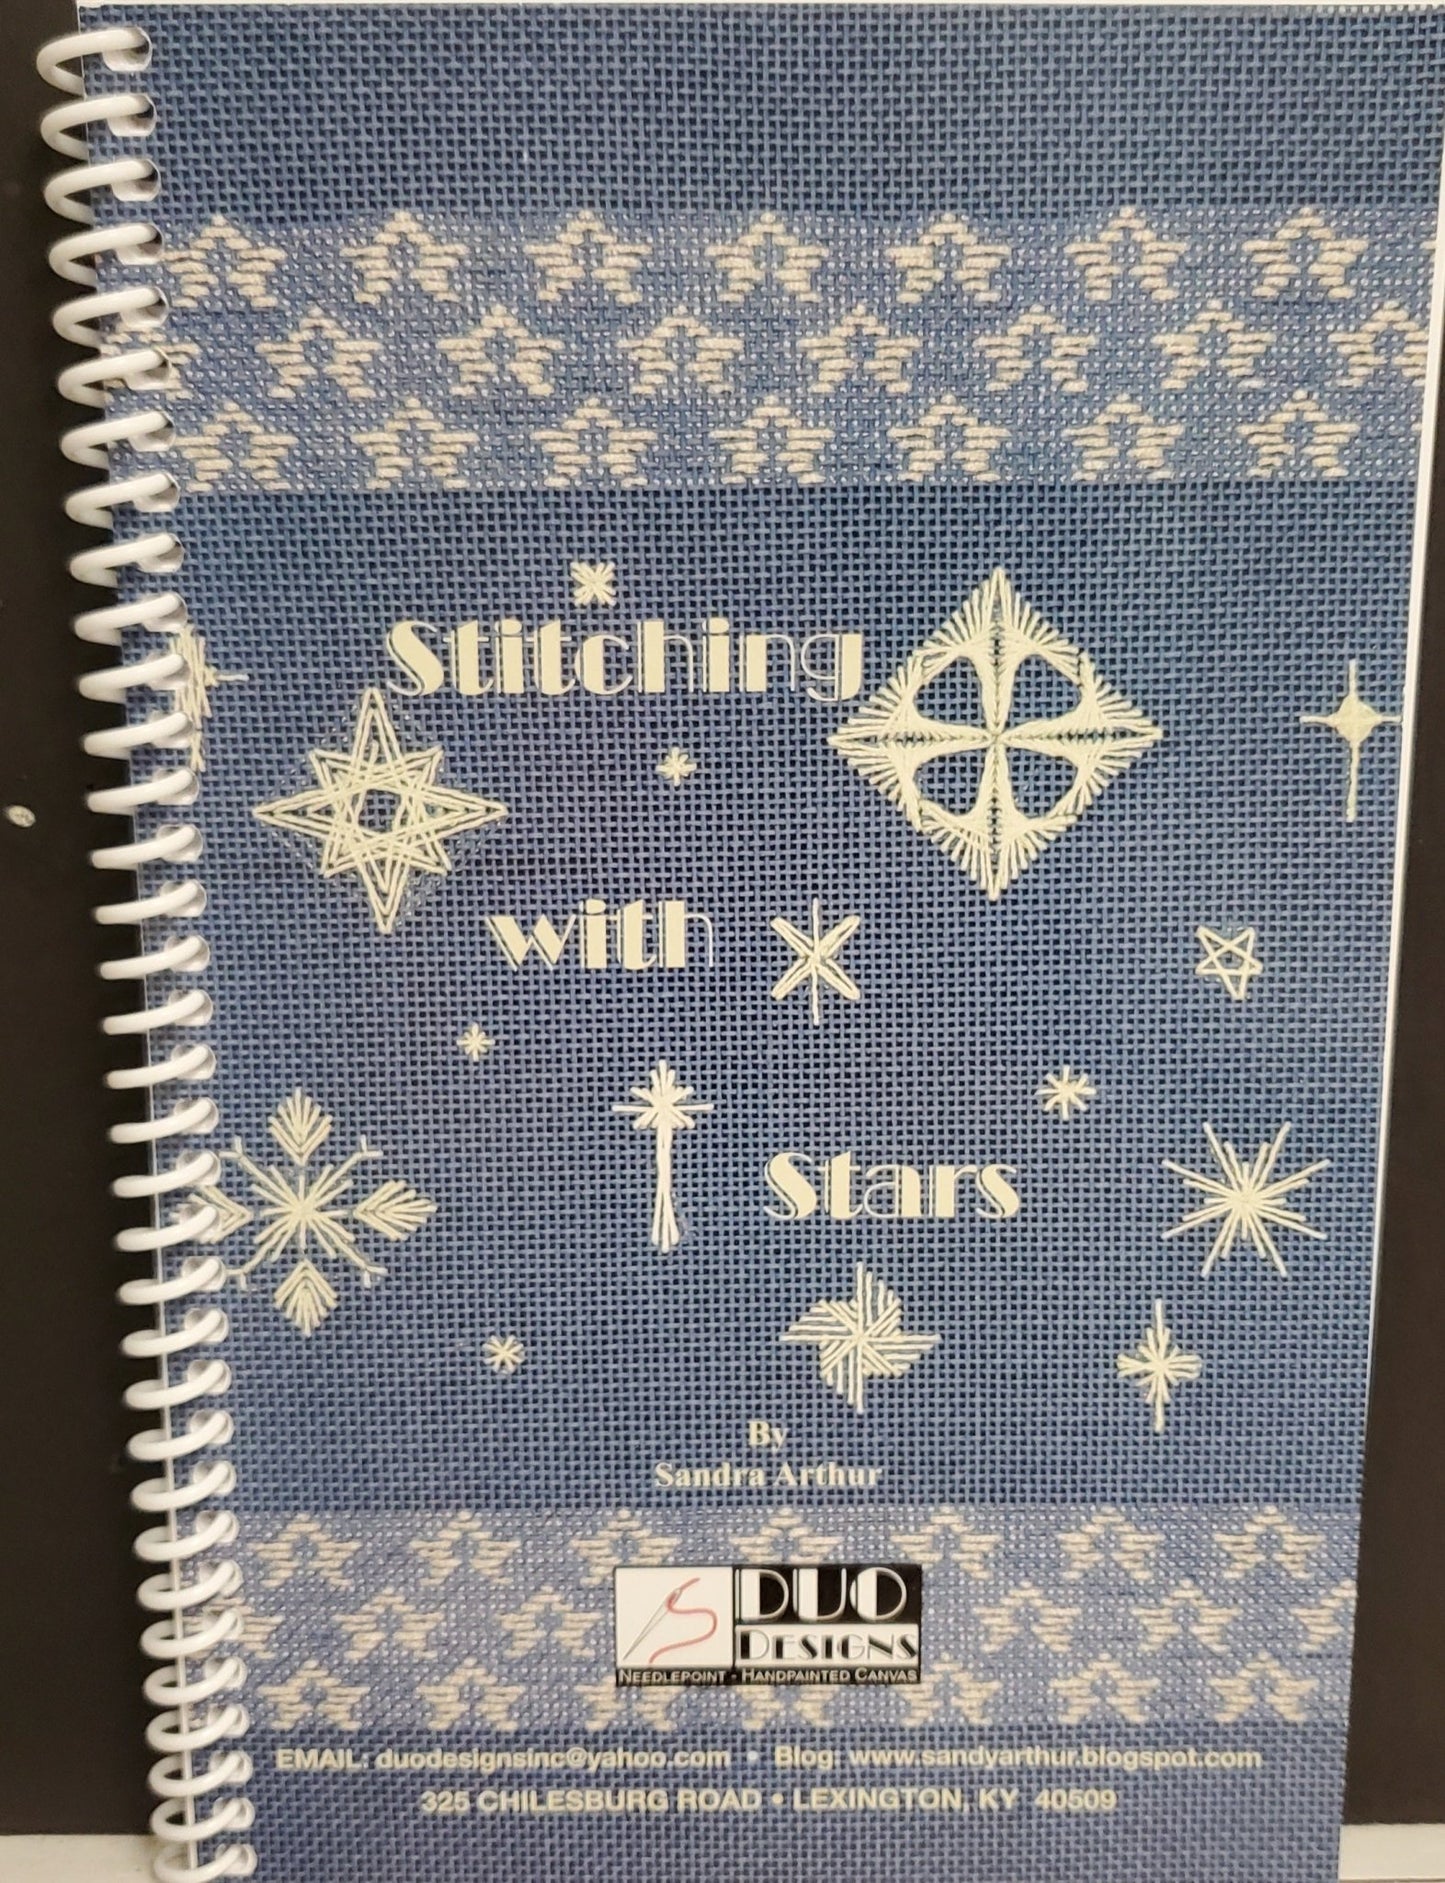 Stitching with Stars - The Flying Needles